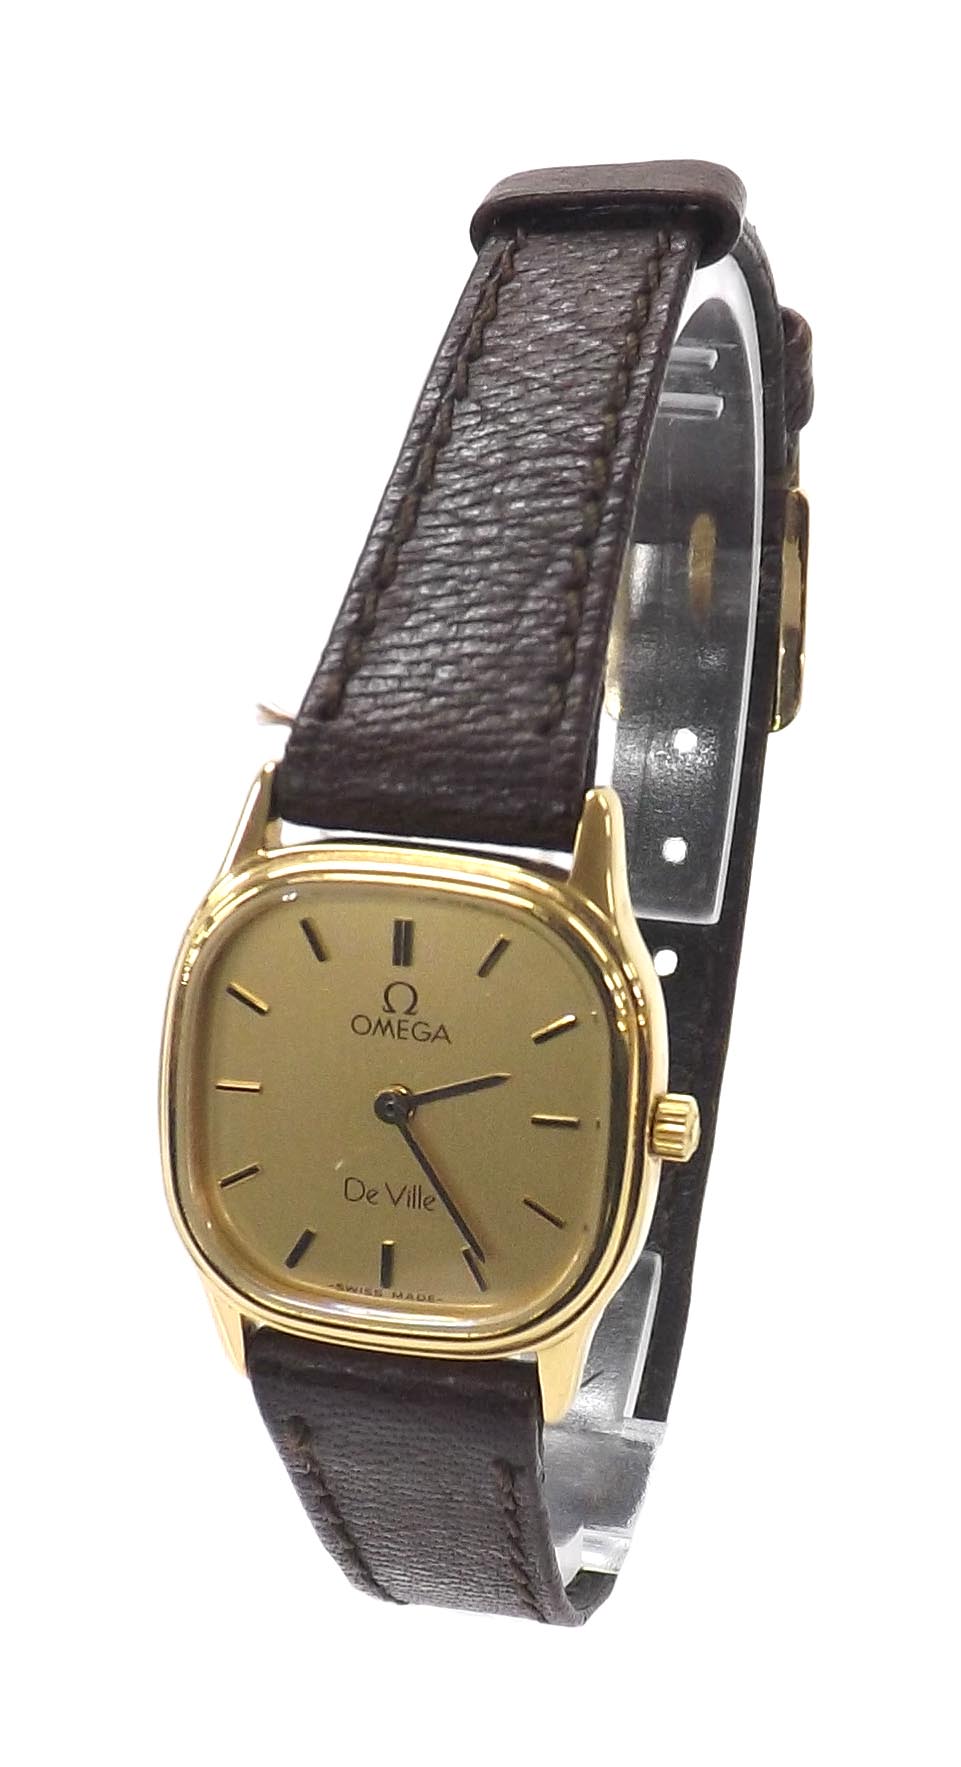 Omega De Ville Quartz gold plated lady's wristwatch, the gilt dial with baton markers, leather